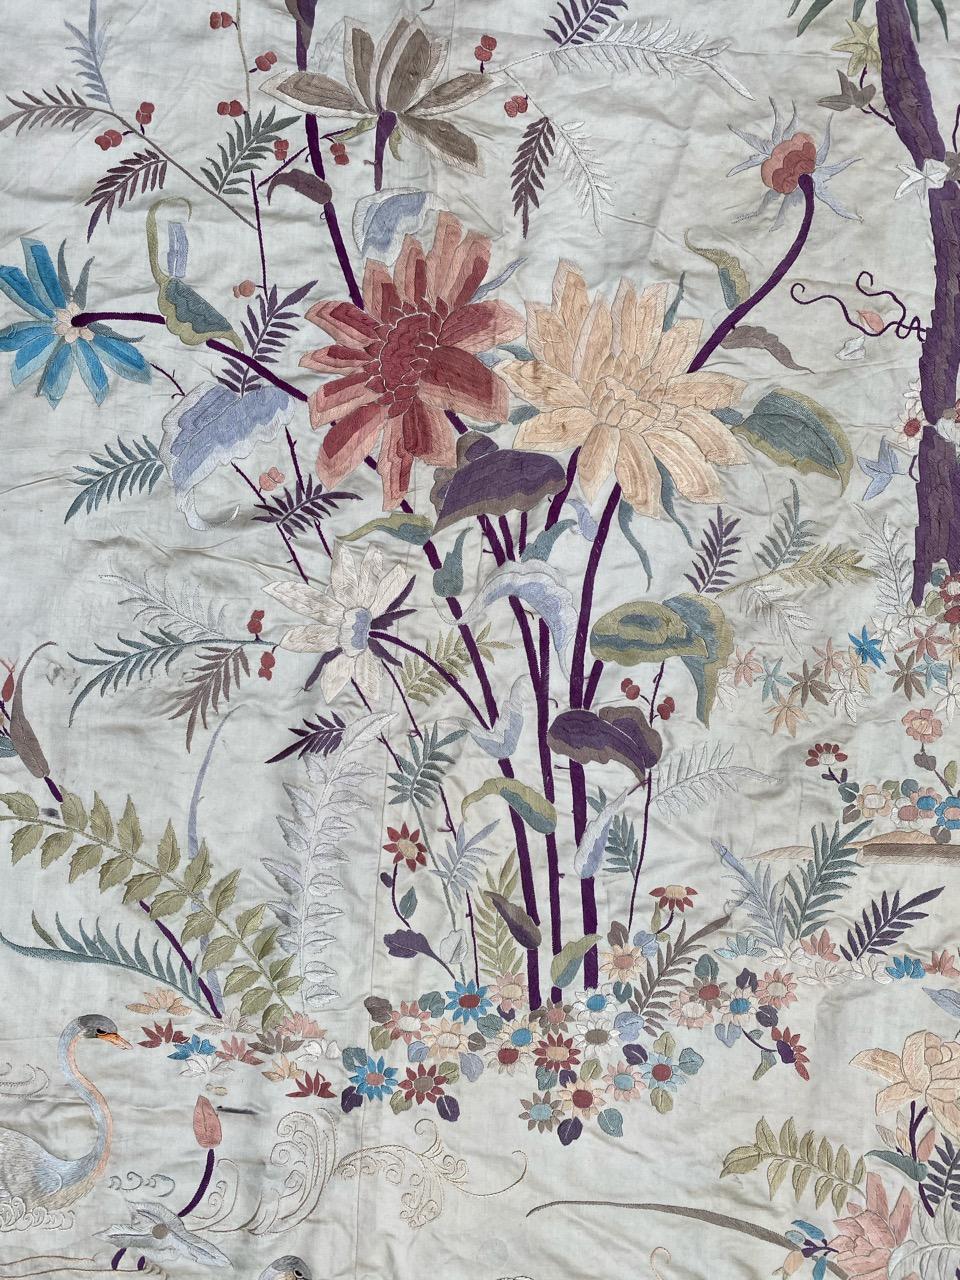 Wonderful early 20th century Chinese embroidery with beautiful design with birds and flowers, and beautiful colors, entirely hand embroidered with silk threads on silk foundation.